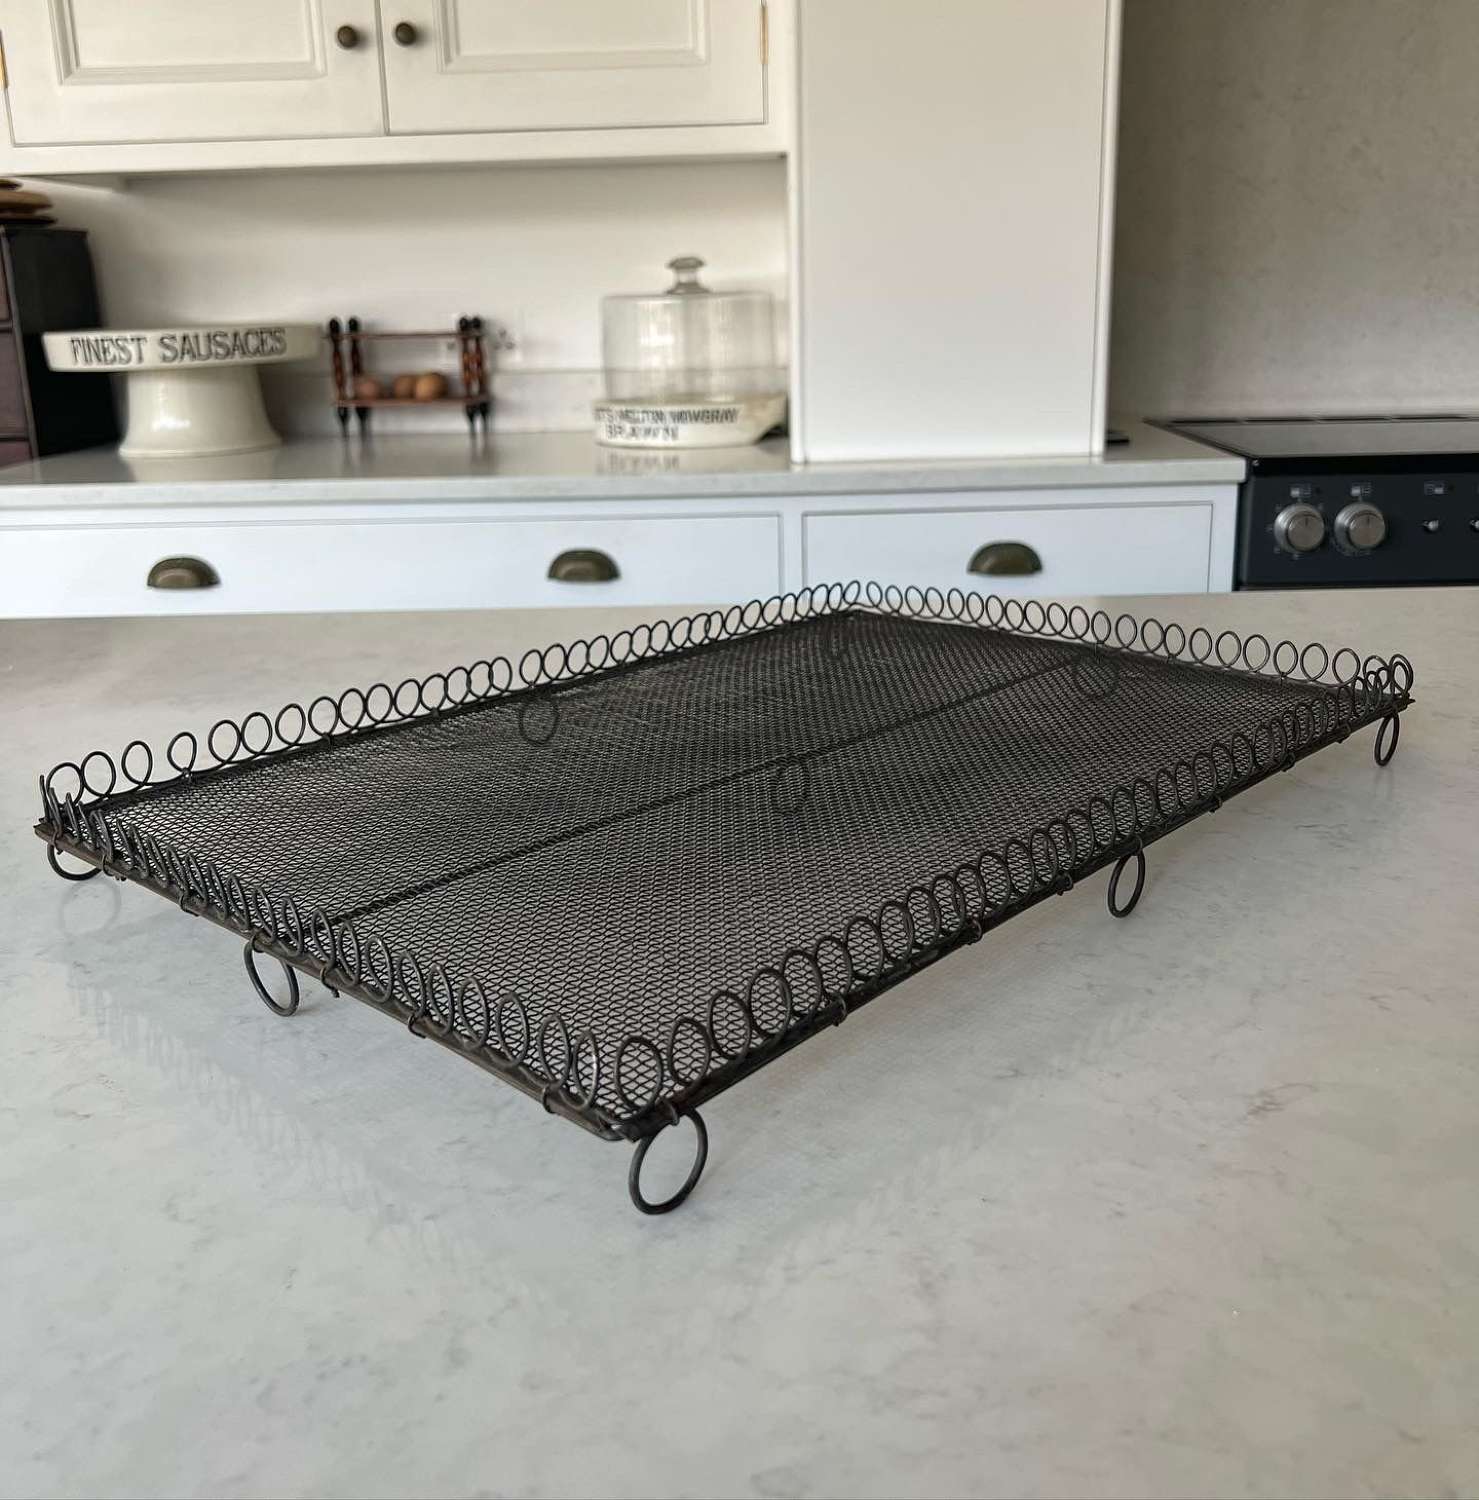 Huge Late Victorian Wire Work Cake Cooling Tray with Loop Edging